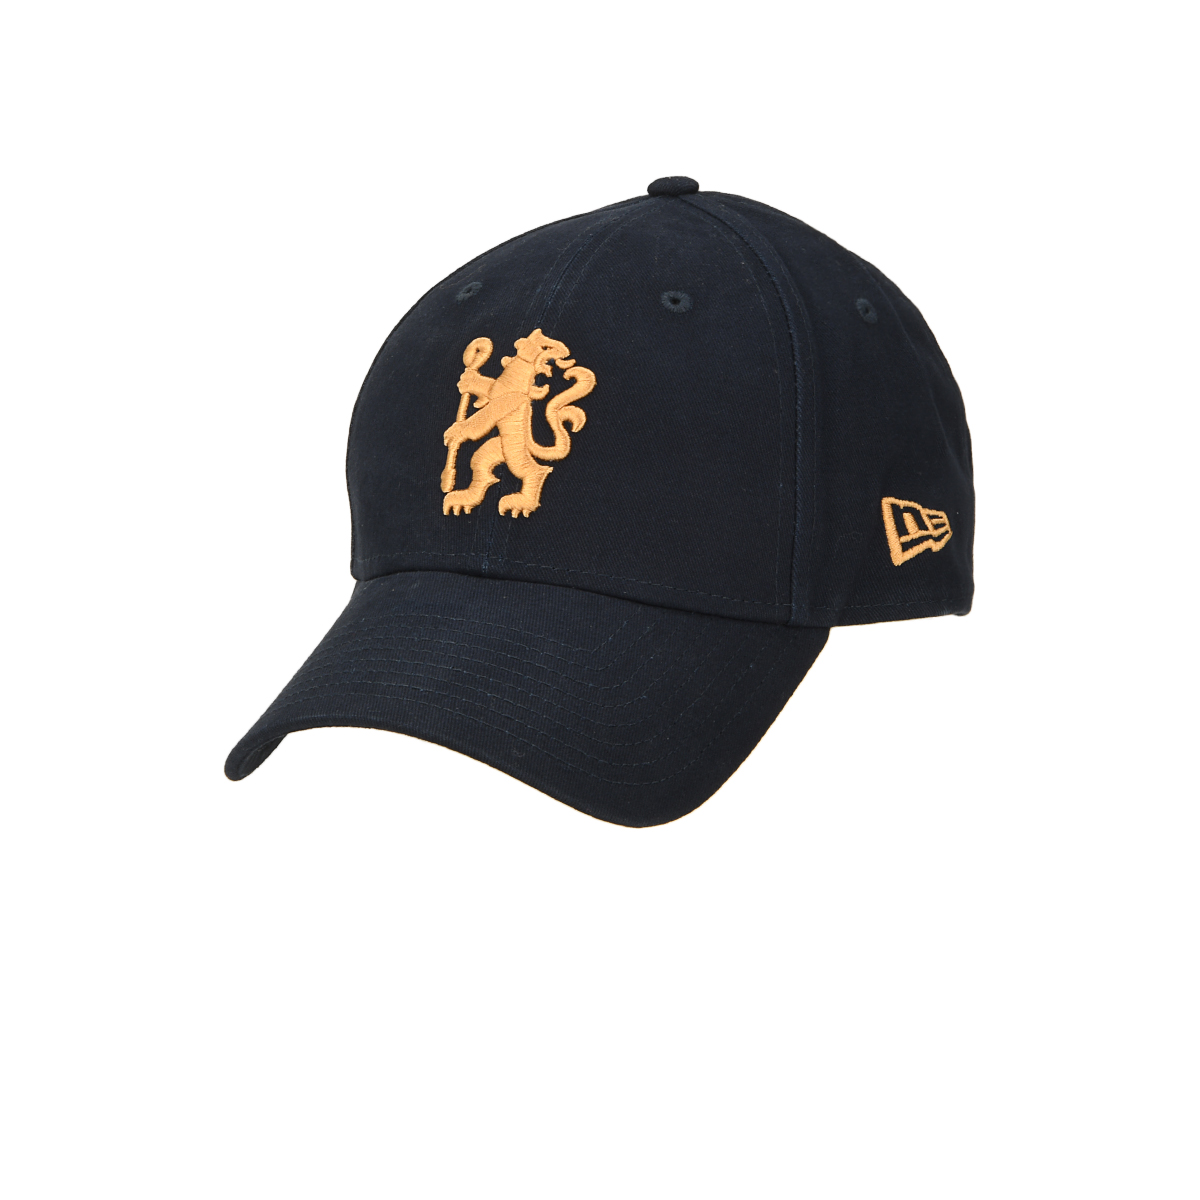 Gorra New Era Brushed Cotton 9Forty Chelsea,  image number null